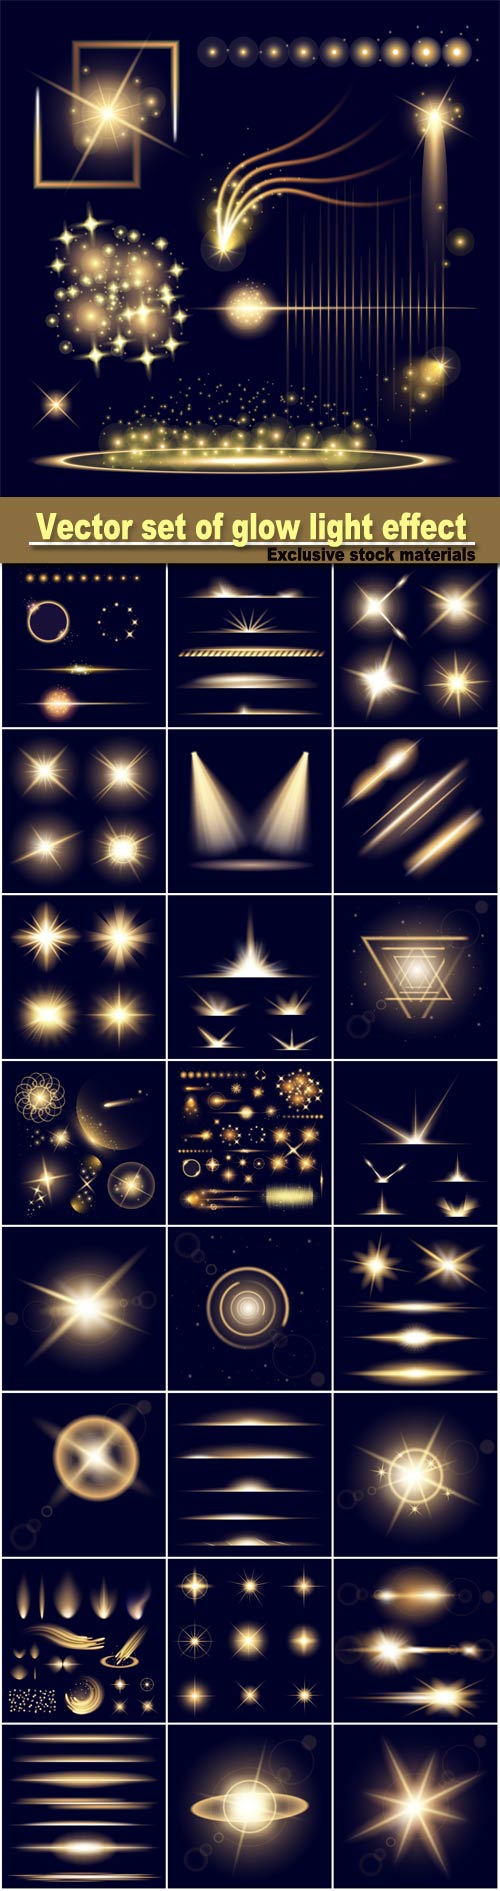 Vector set of glow light effect stars bursts with sparkles isolated on black background